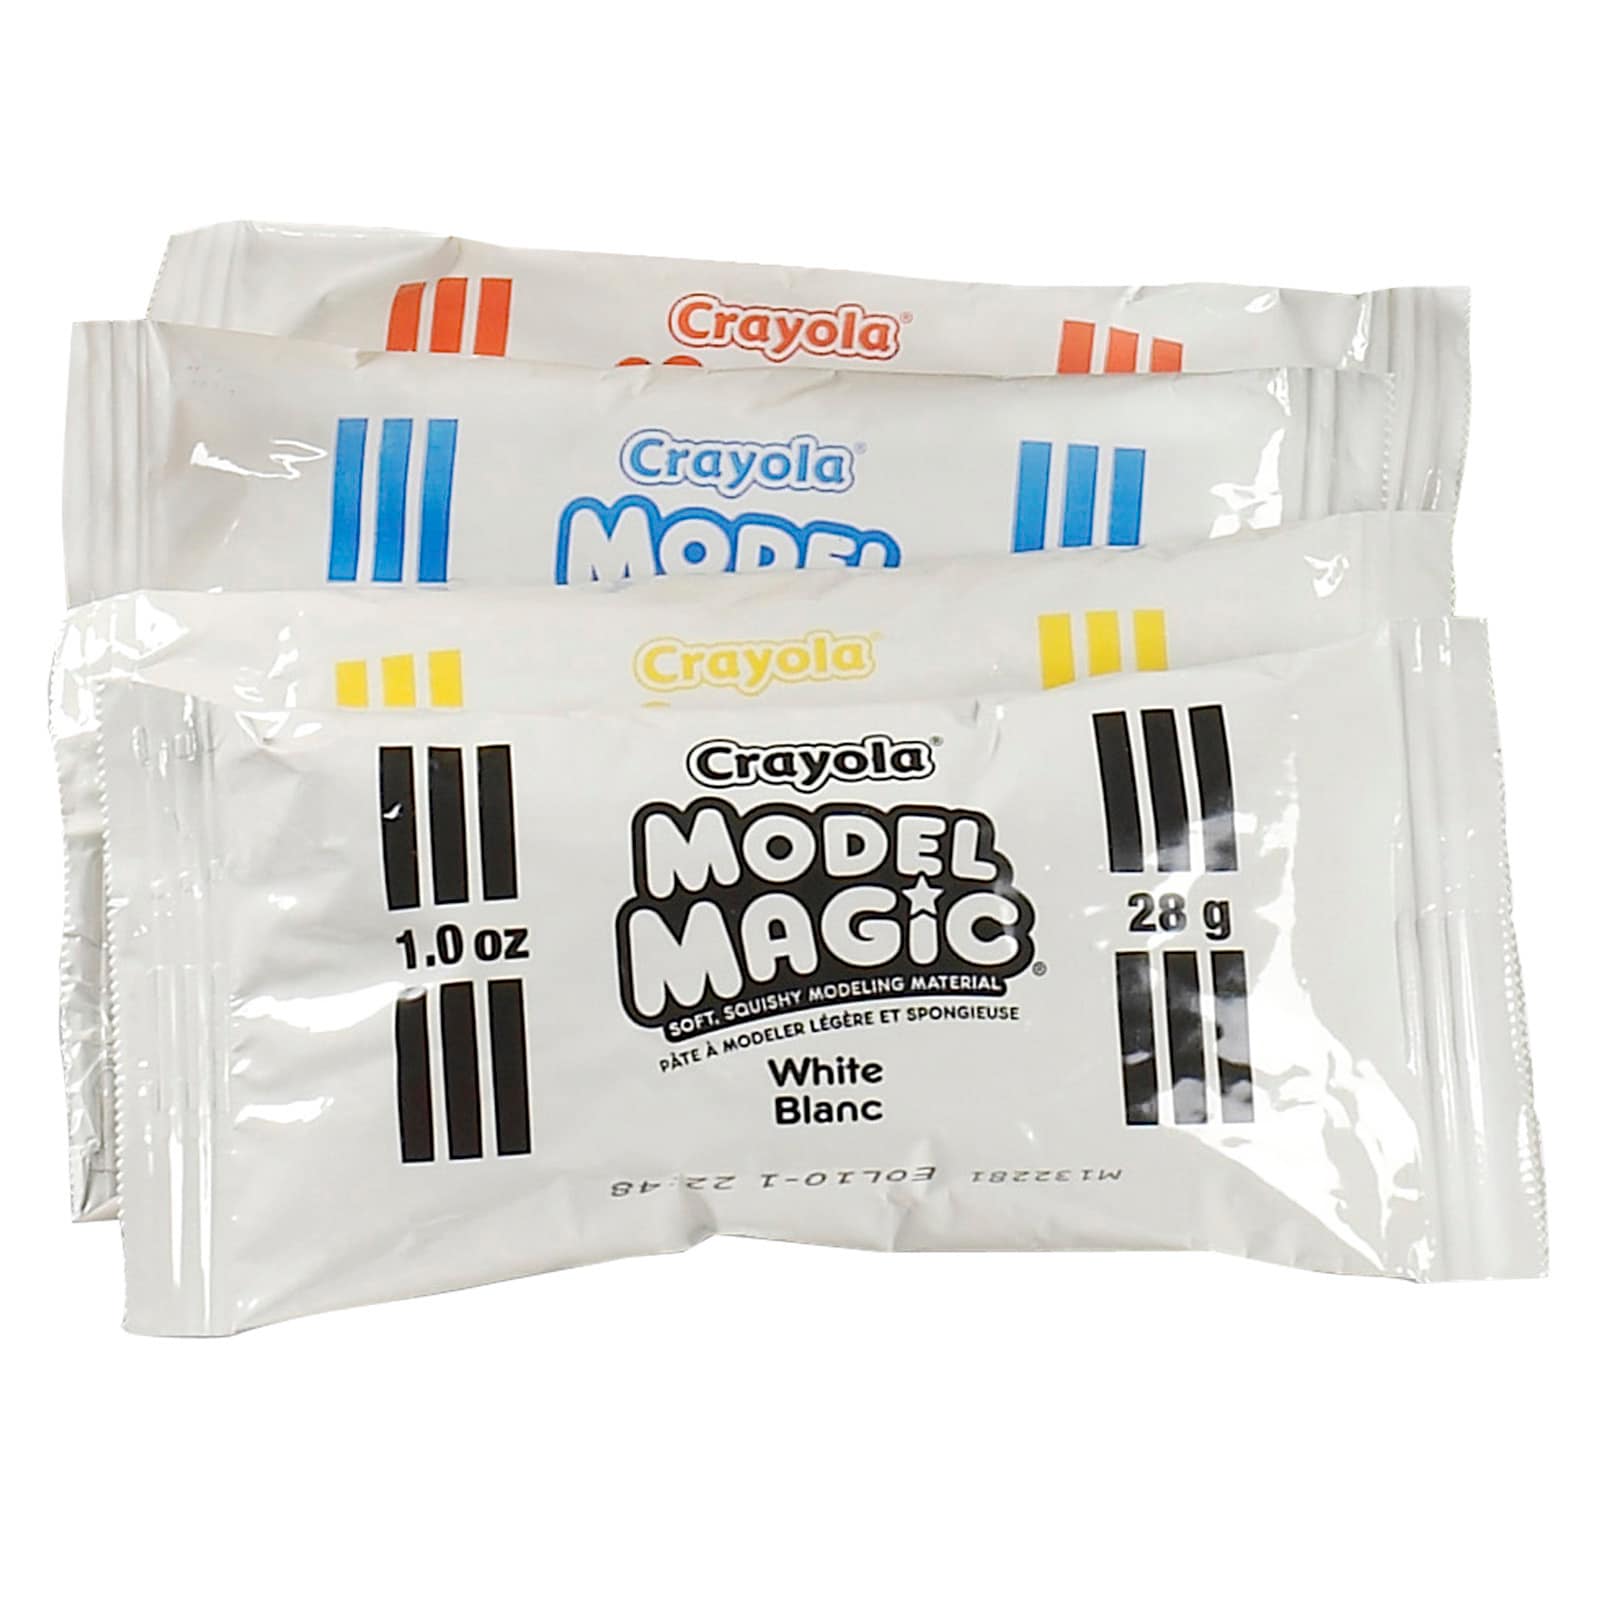 DON'T BUY! 7 REASONS Crayola Model Magic Clay is NOT worth it